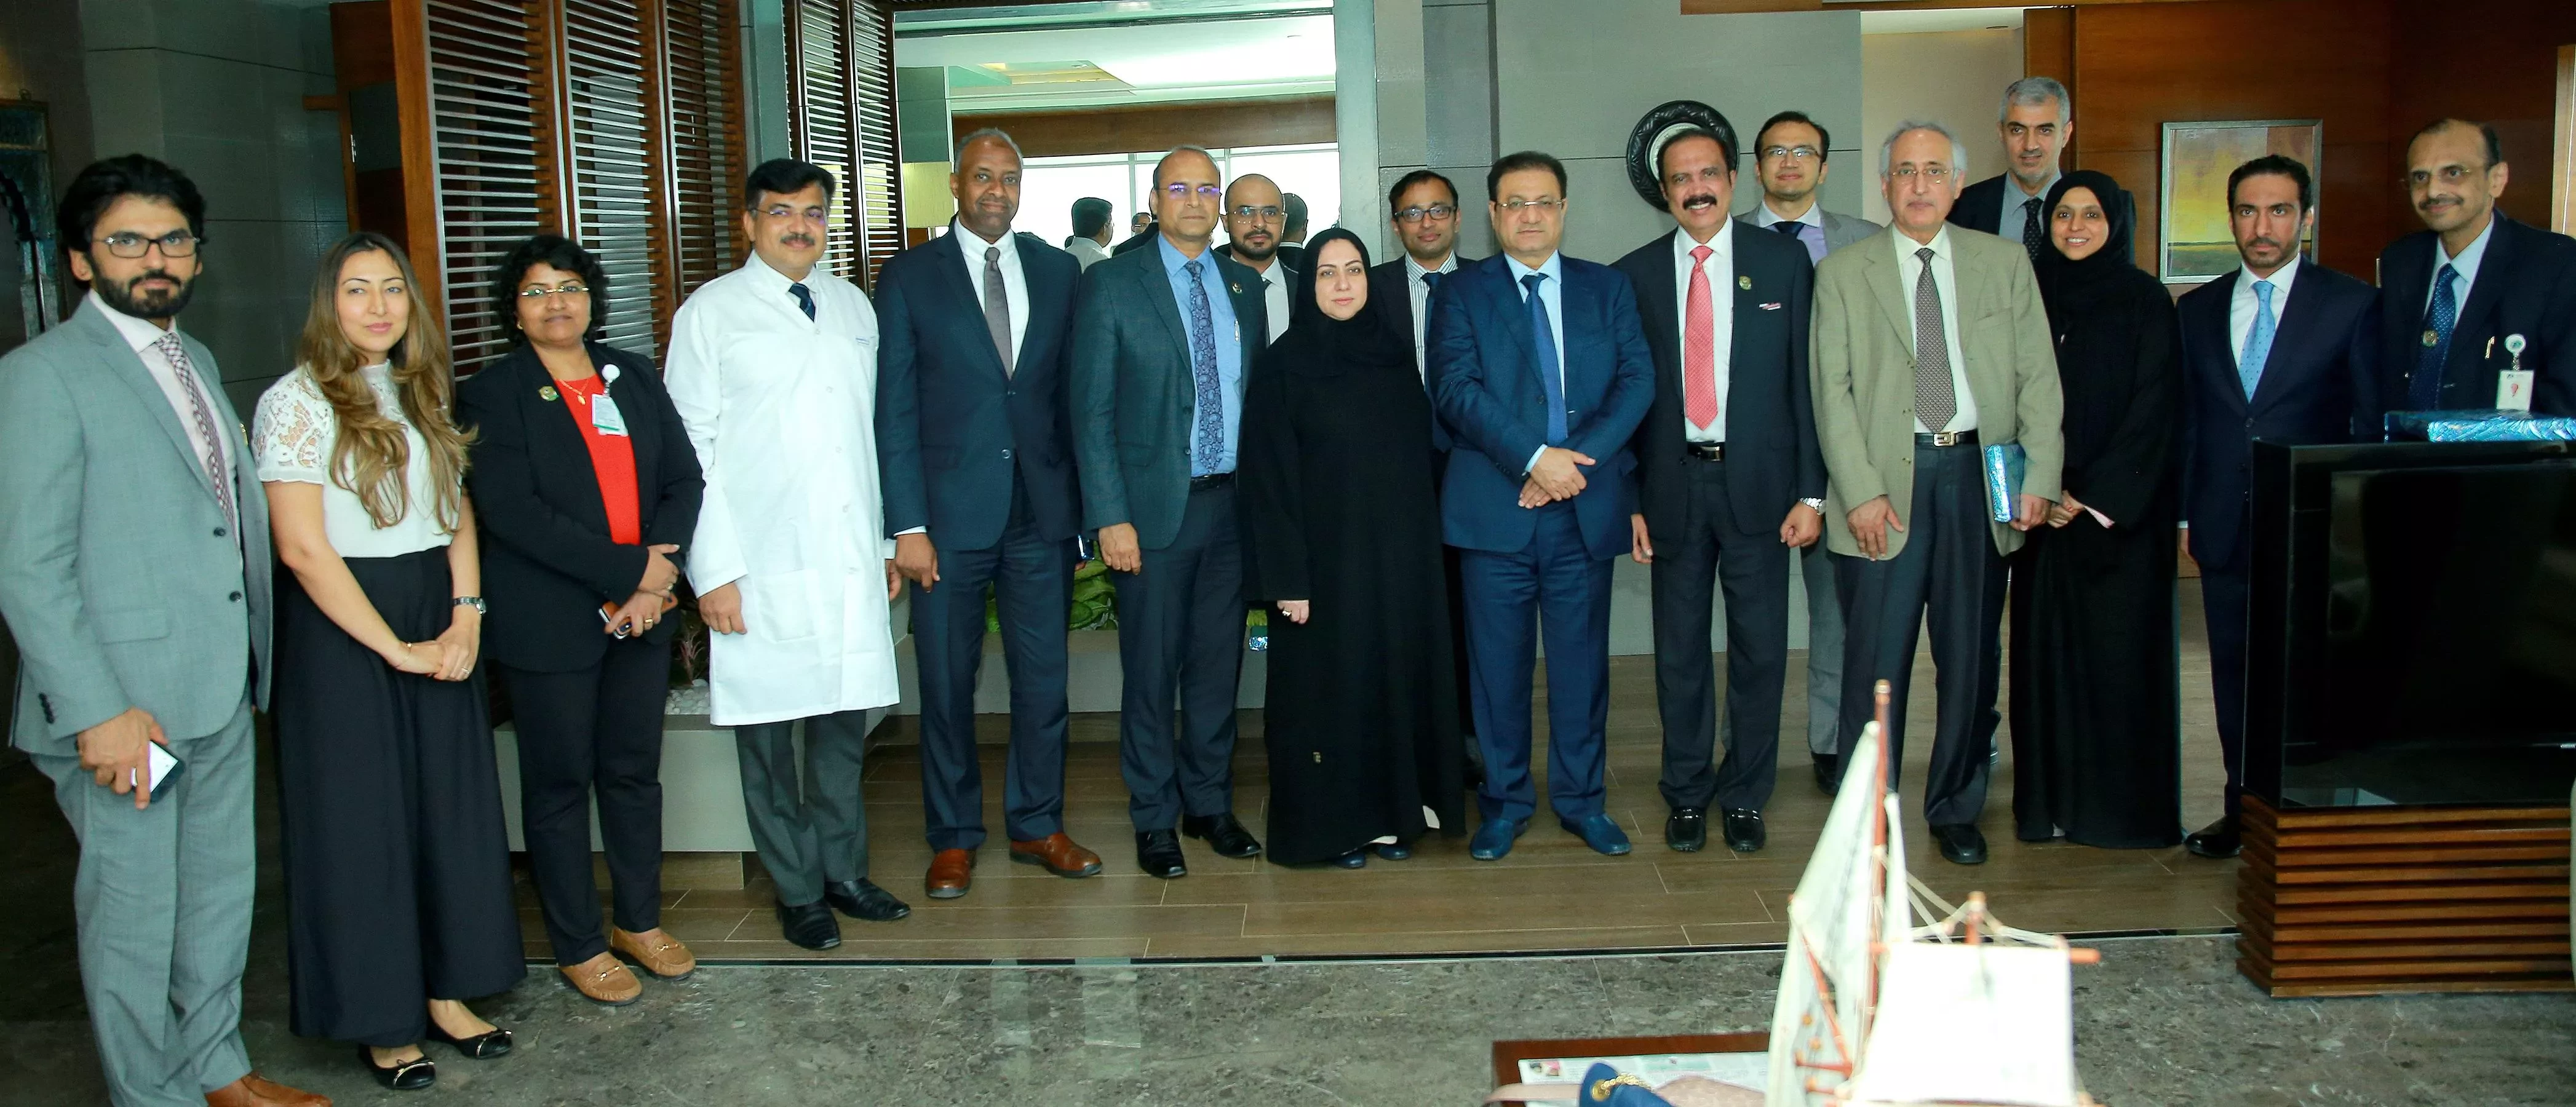 HE-Humaid-Al-Qutami-Director-General-of-the-DHA-and-his-team-of-delegates-with-Dr-Azad-Moopen-Chairman-and-MD-of-Aster-DM-Healthcare-and-team-at-Aster-Medcity-hospital-Kochi.JPG